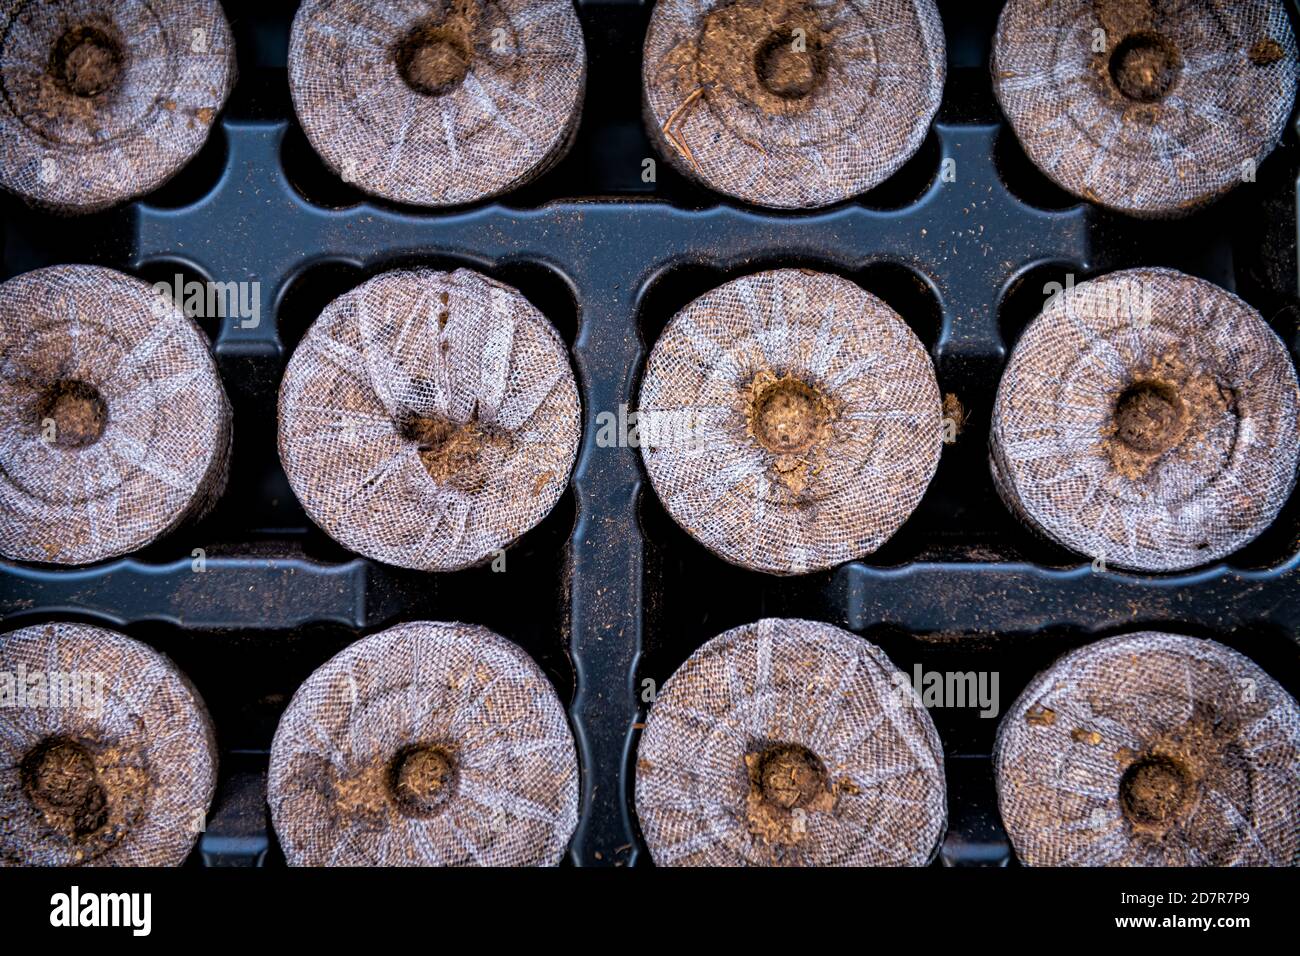 Peat pellets tablets macro closeup flat top view in mesh on black tray for potted plants containers for growing indoor garden seedlings during winter Stock Photo